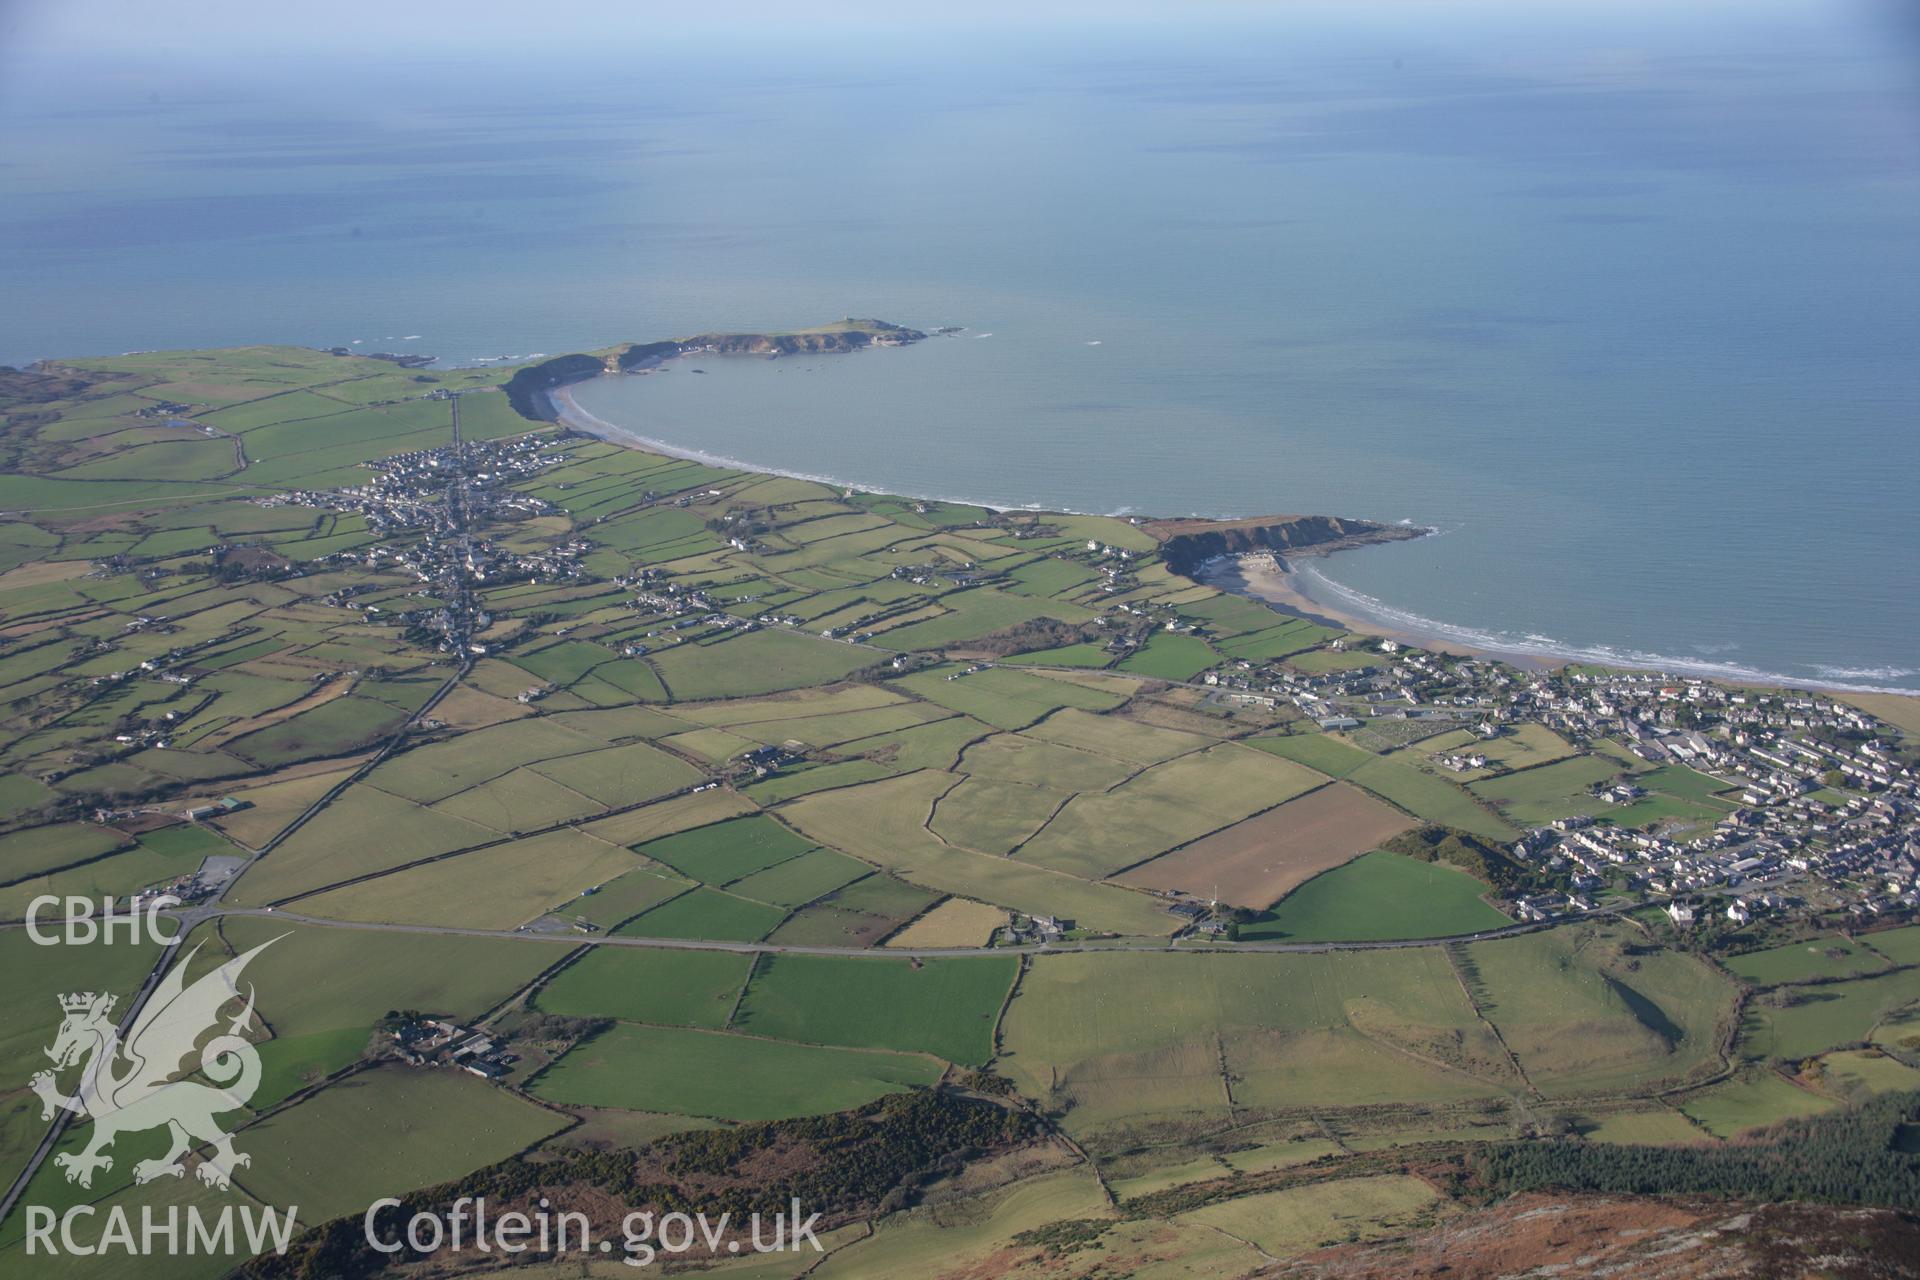 RCAHMW colour oblique aerial photograph of Porth Dinllaen. A coastal landscape view from Nefyn looking south-west. Taken on 09 February 2006 by Toby Driver.